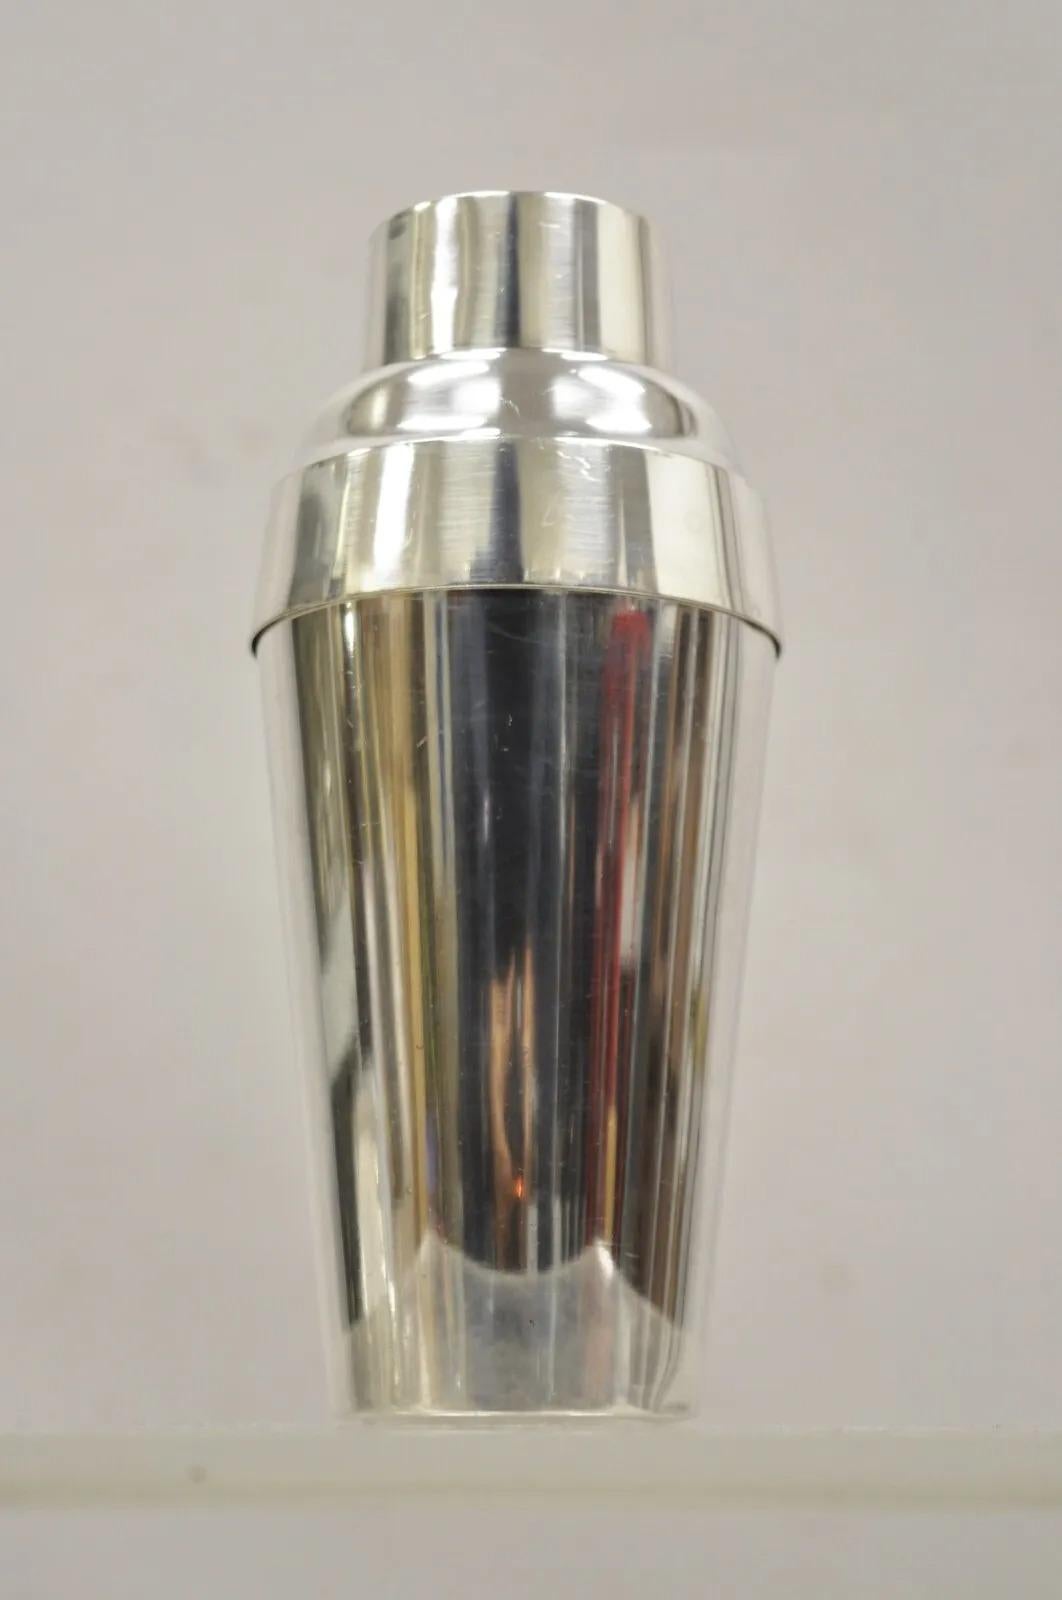 Vintage GM Co. Silver Plated Art Deco Cocktail Bar Martini Shaker. Circa Mid to Late 20th Century. Measurements: 8.5